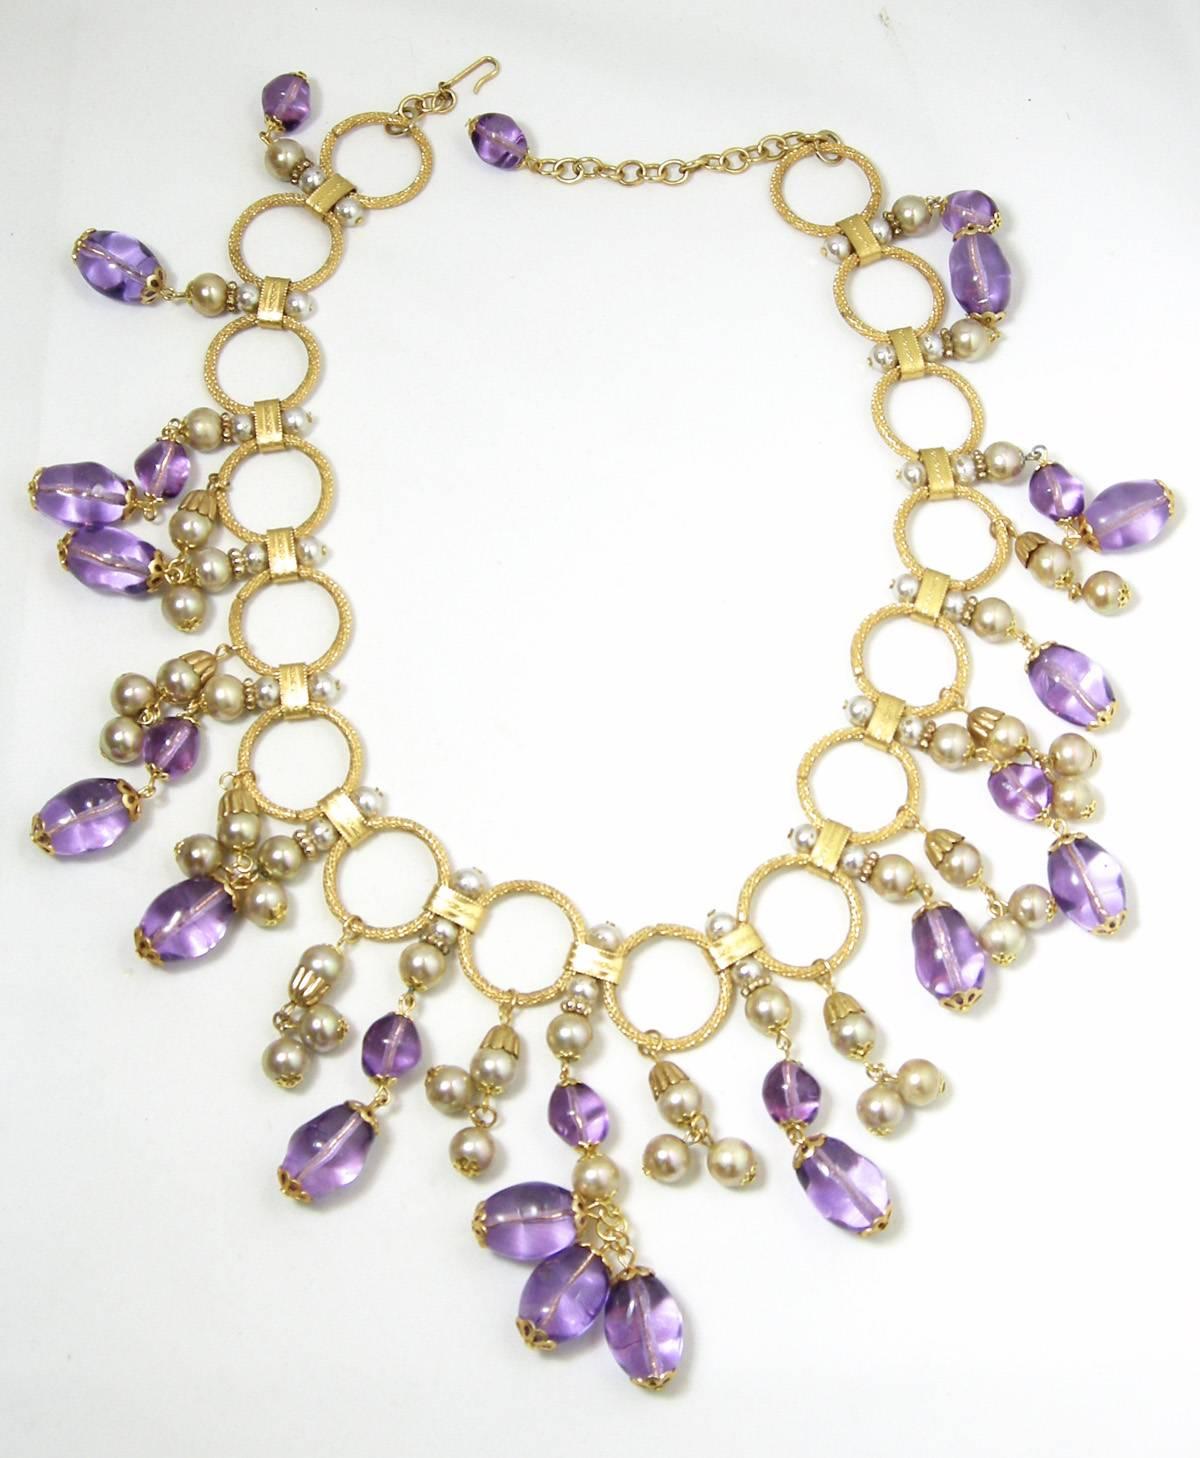 There was a great time in the 50s when wonderful necklaces filled our low cut clothing and created a wow sensation and this necklace still has plenty of wow left. The necklace measures 22” with a hook closure and is in great condition.
